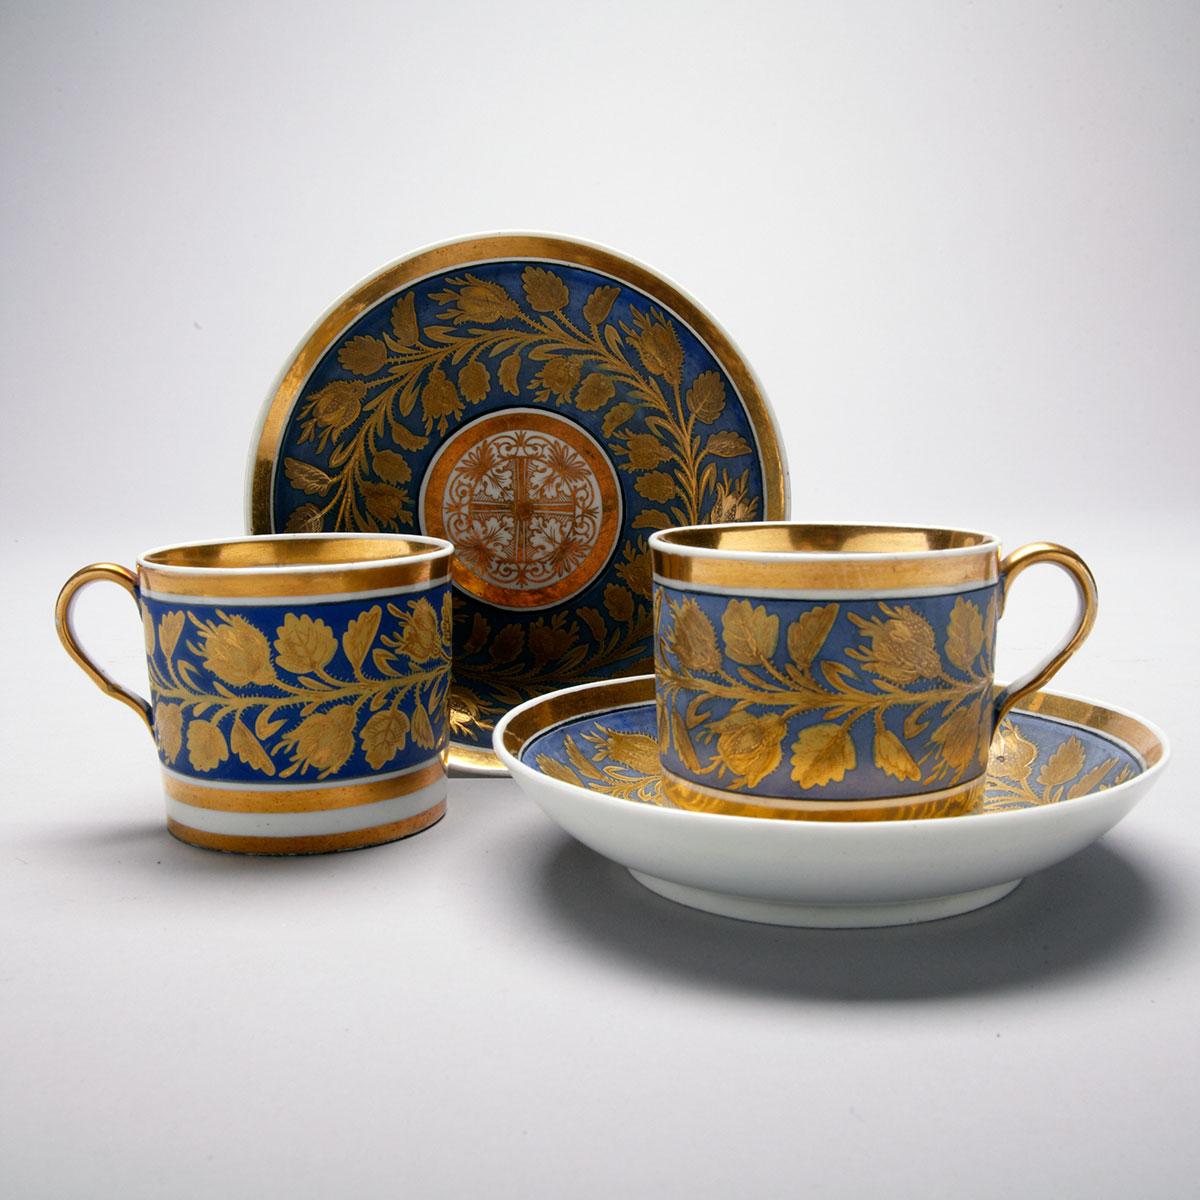 Pair of Coalport Coffee Cans and Saucers, c.1800-05